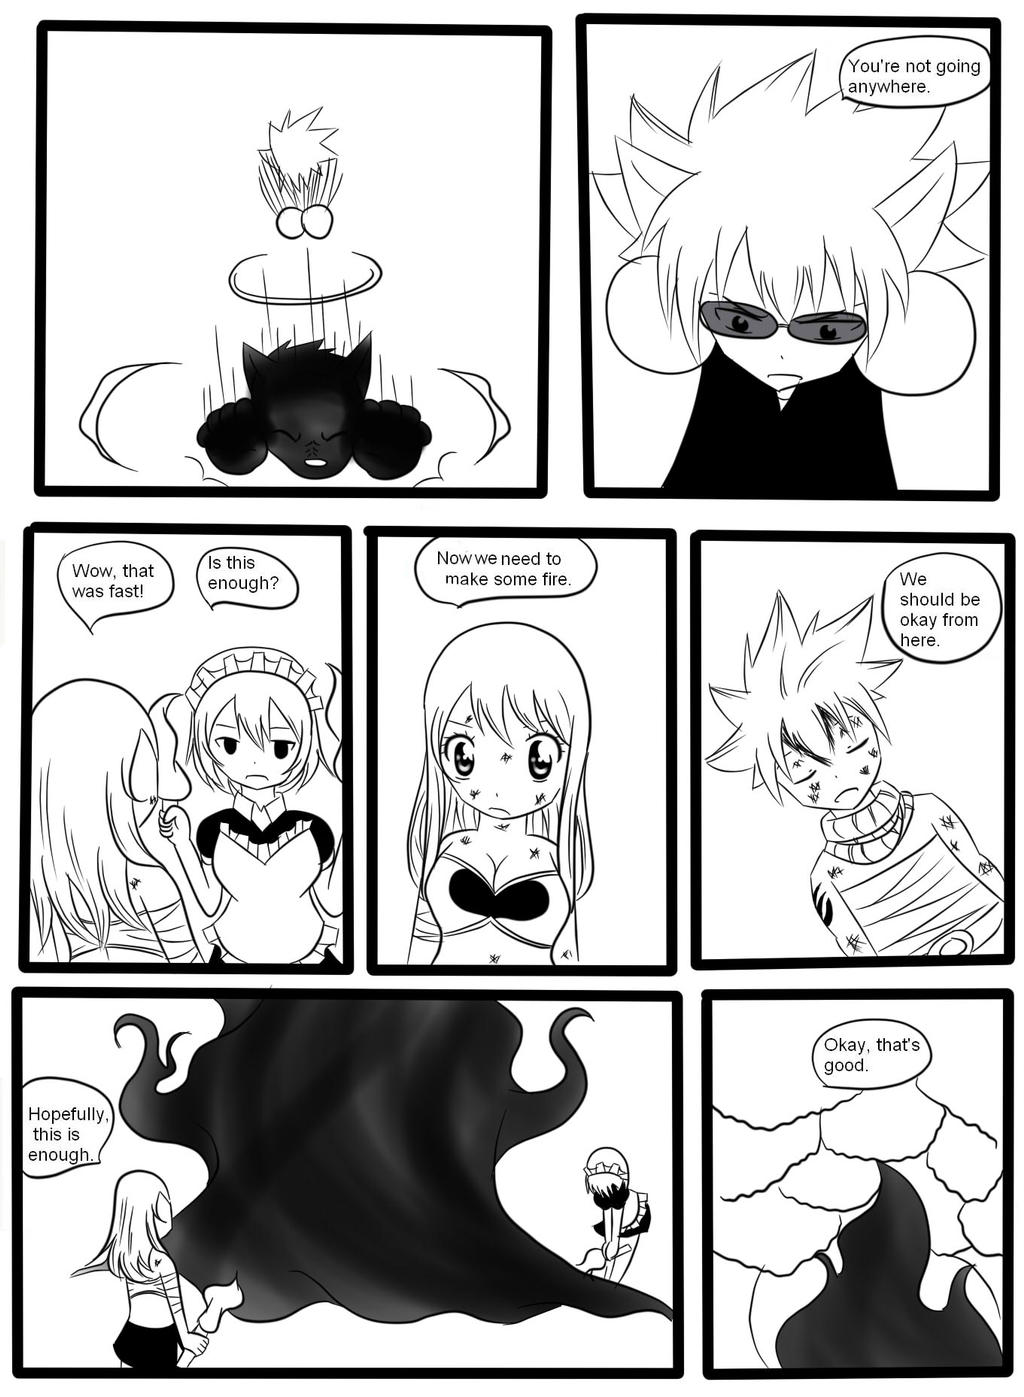 Fairy Tail Crescent Island Page 61 By Xmizuwaterx On Deviantart